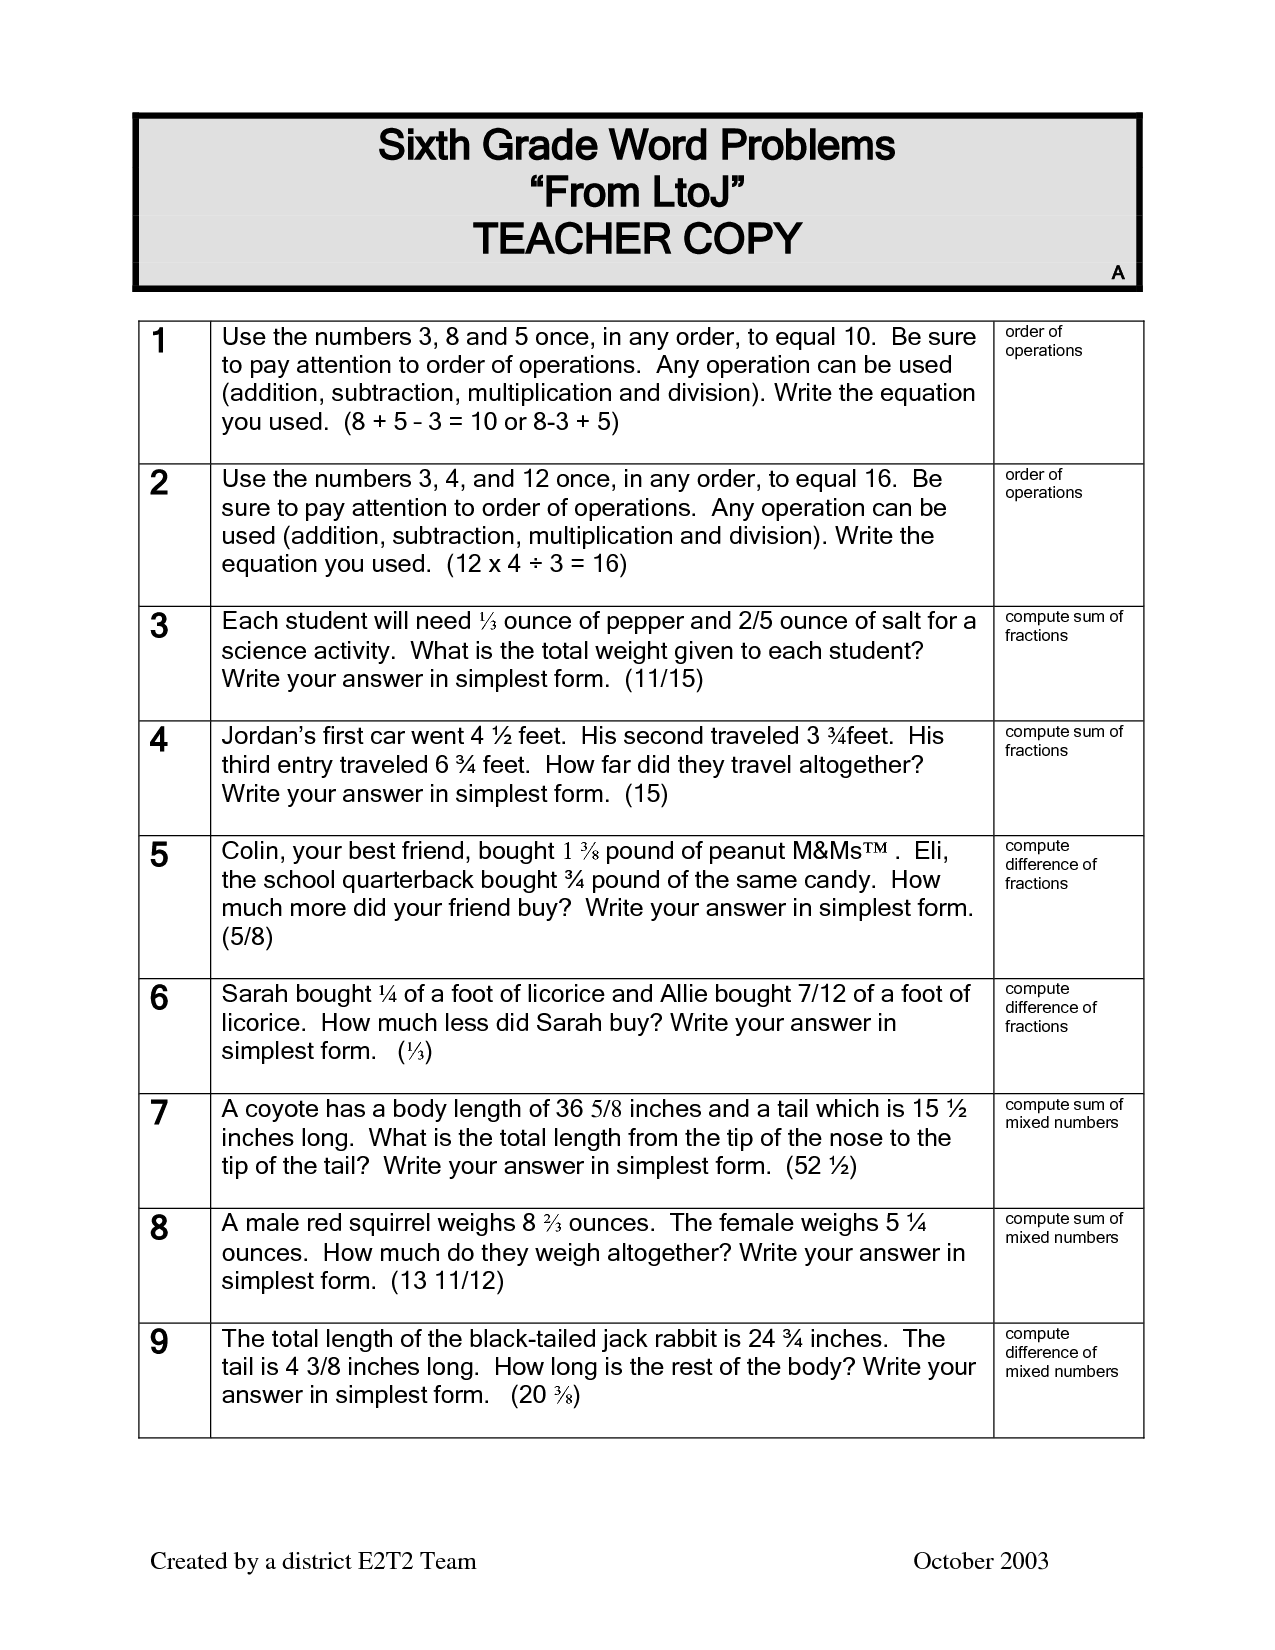 13-best-images-of-4th-grade-reading-worksheets-with-answer-key-fifth-grade-math-worksheets